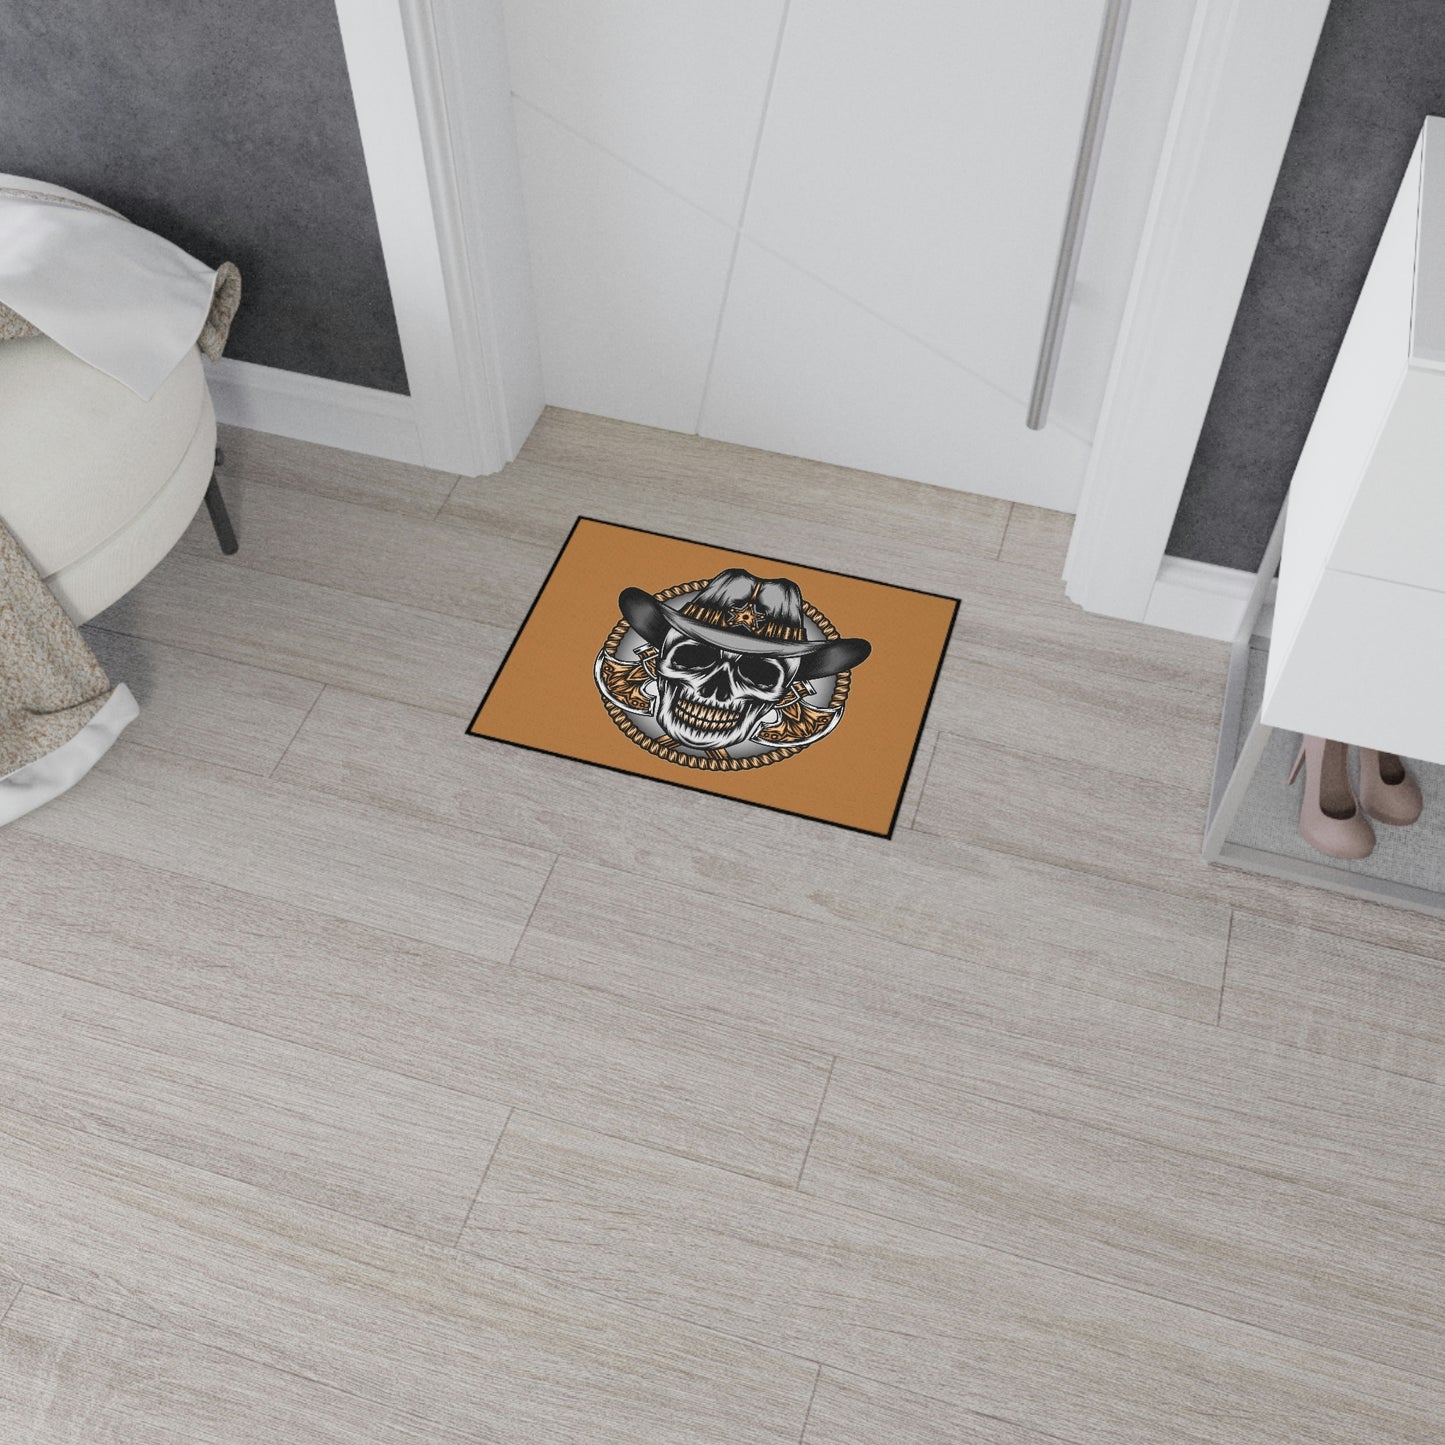 Durable "Skull Cowboy" doormat, embodying western strength and style.